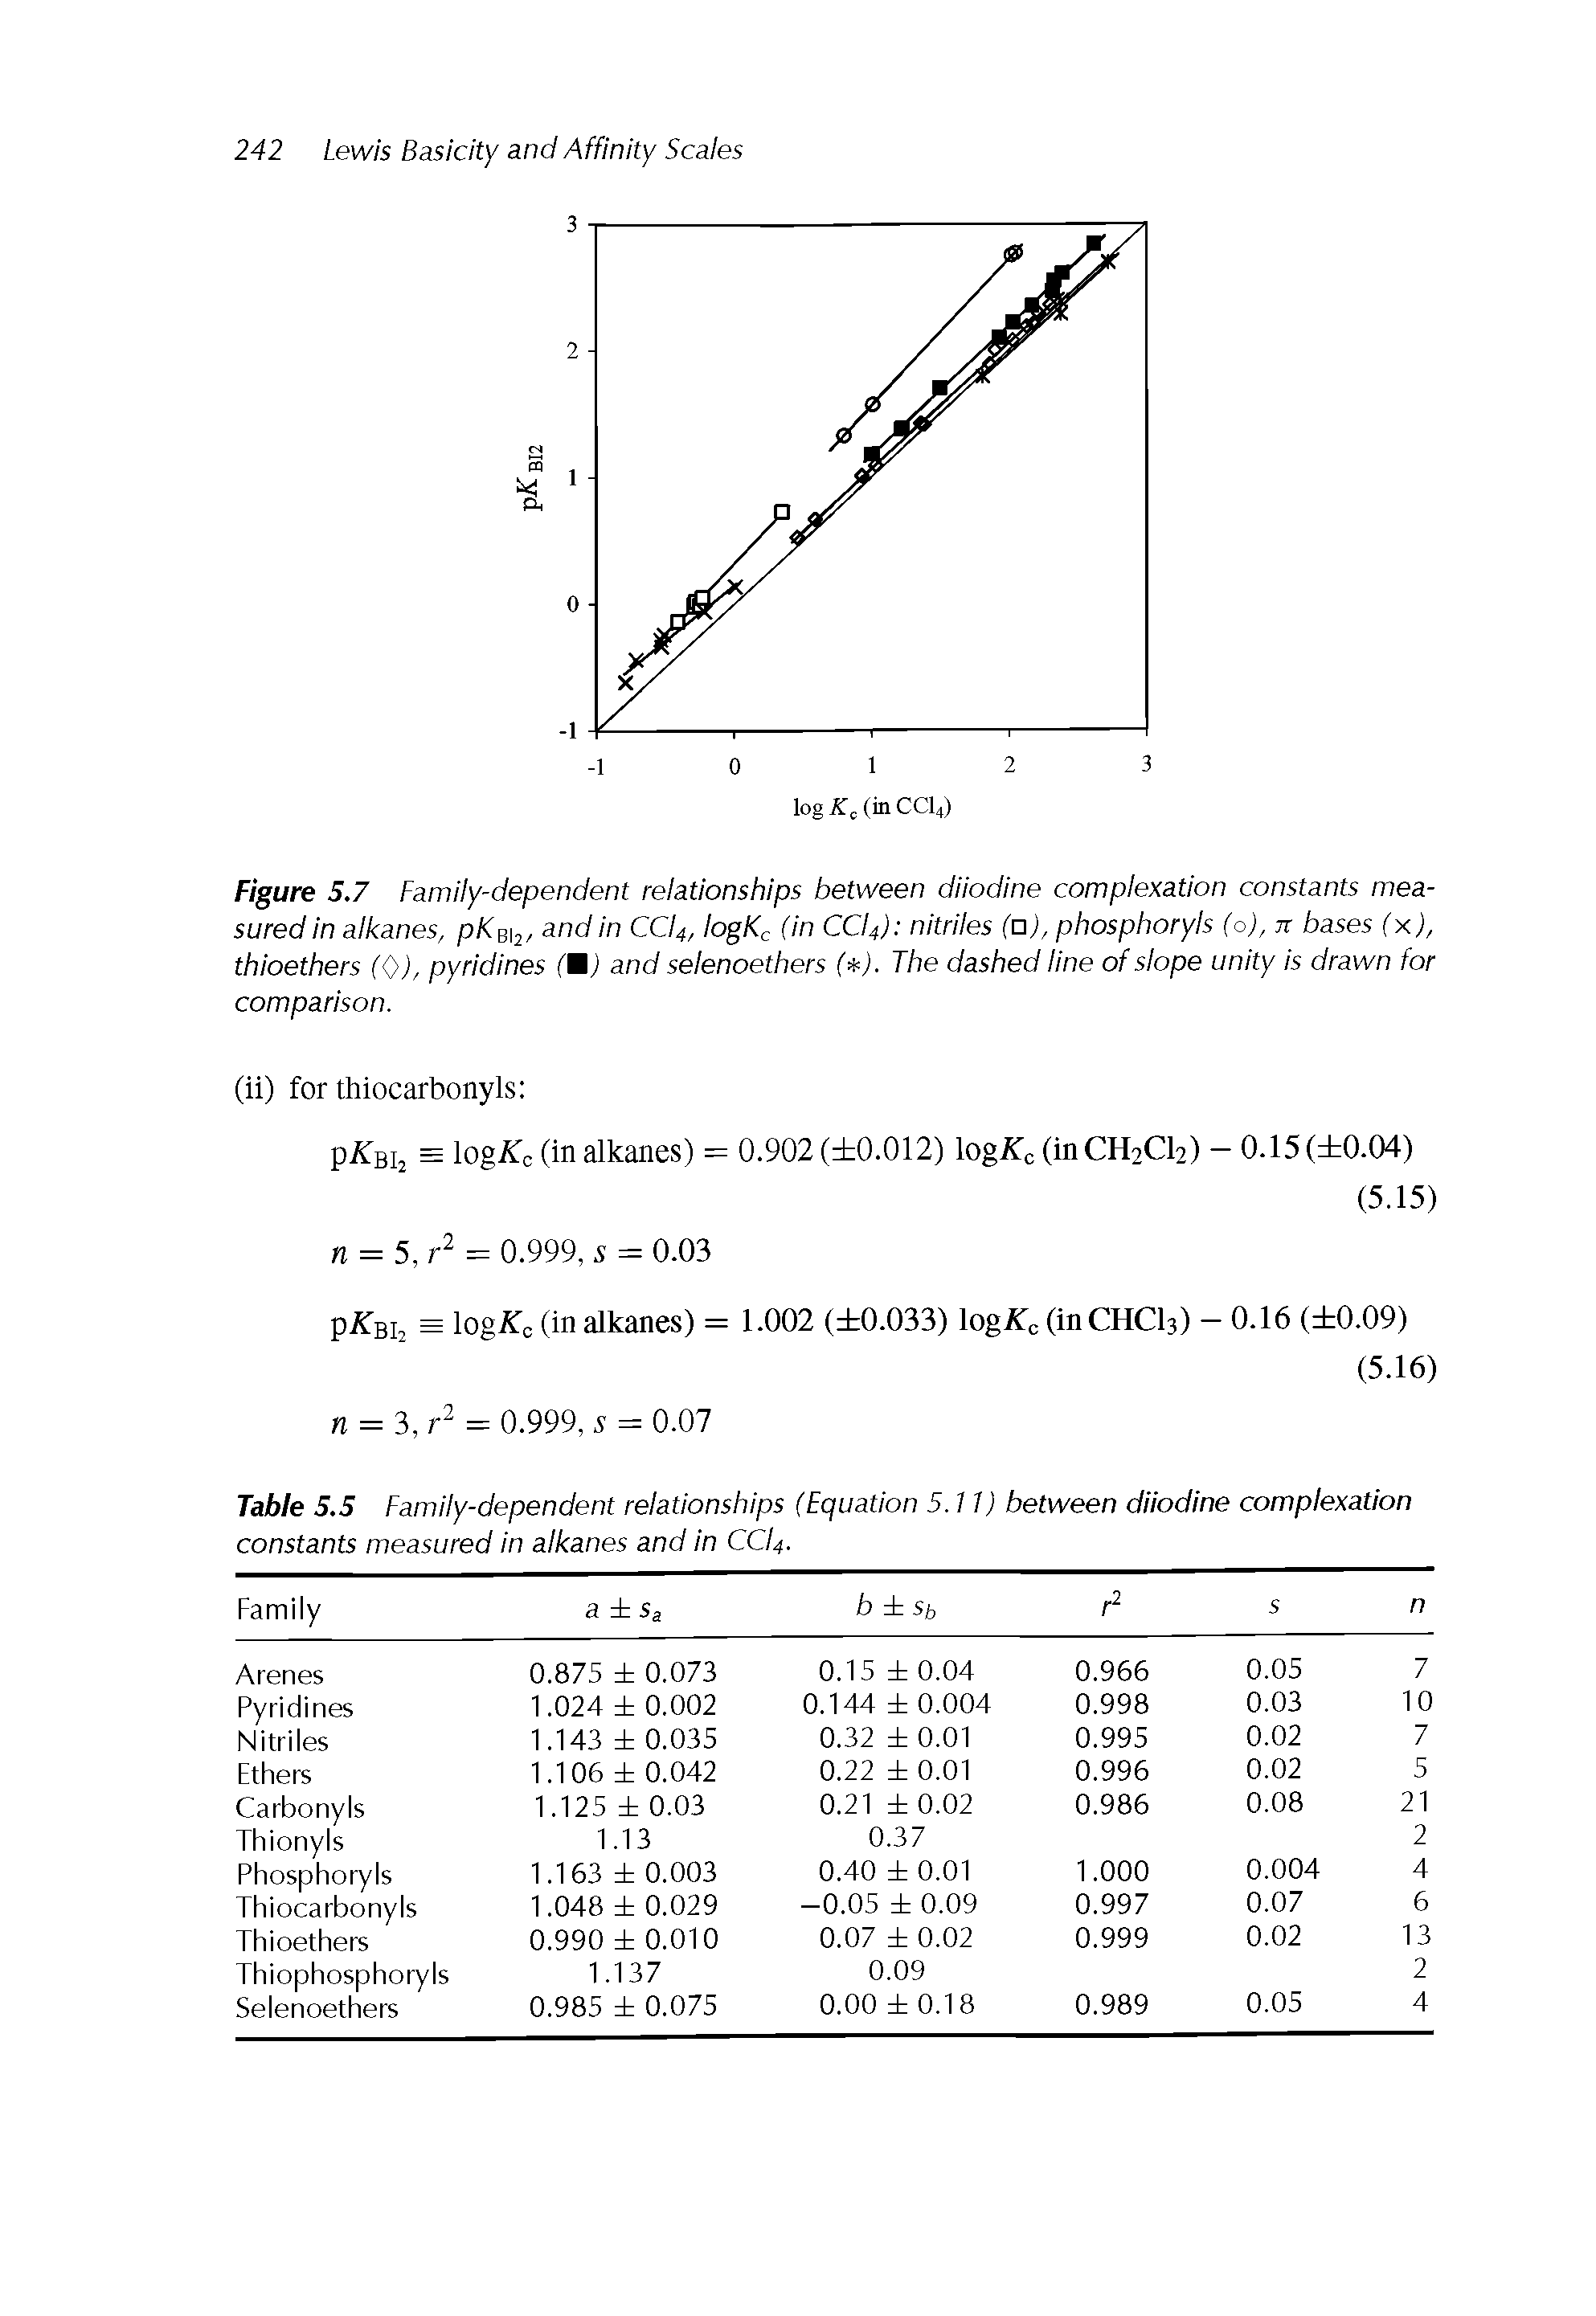 Table 5.5 Family-dependent relationships (Equation 5.11) between diiodine complexation constants measured in alkanes and in CCI4.